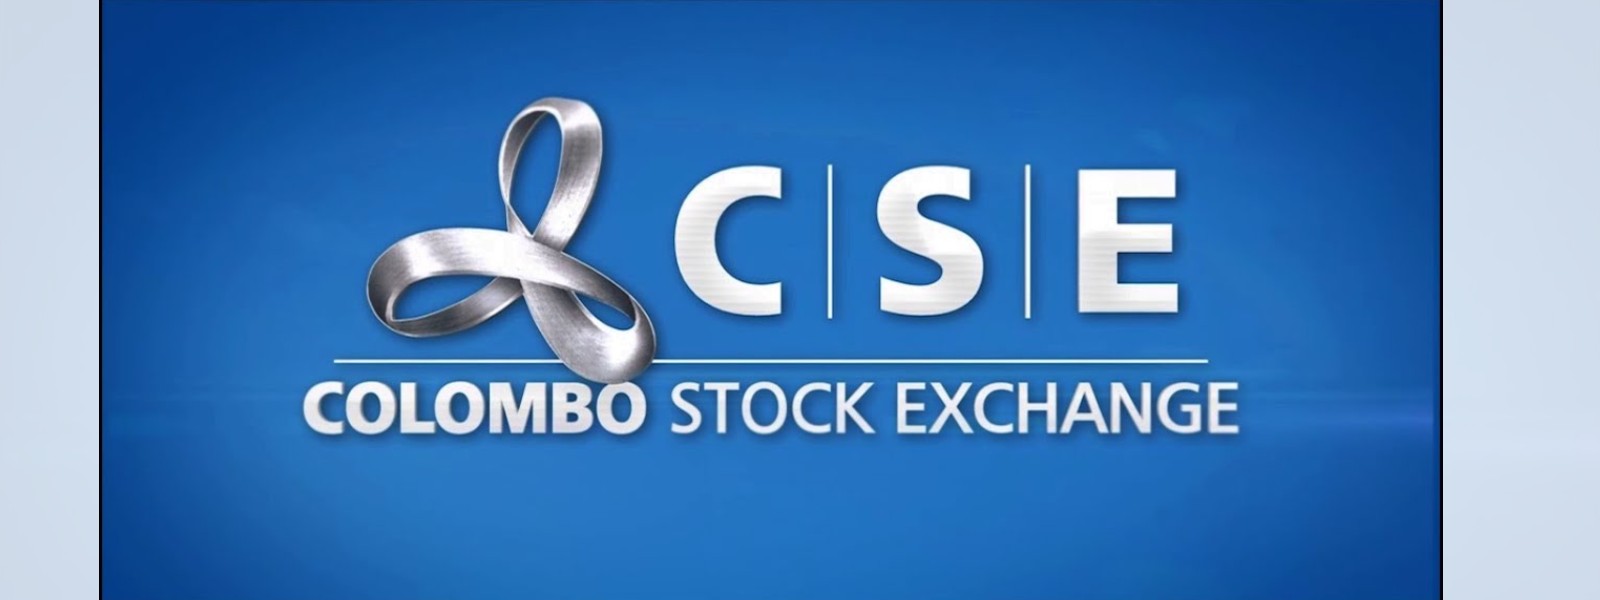 The Colombo Stock Market closes within few minutes of trading